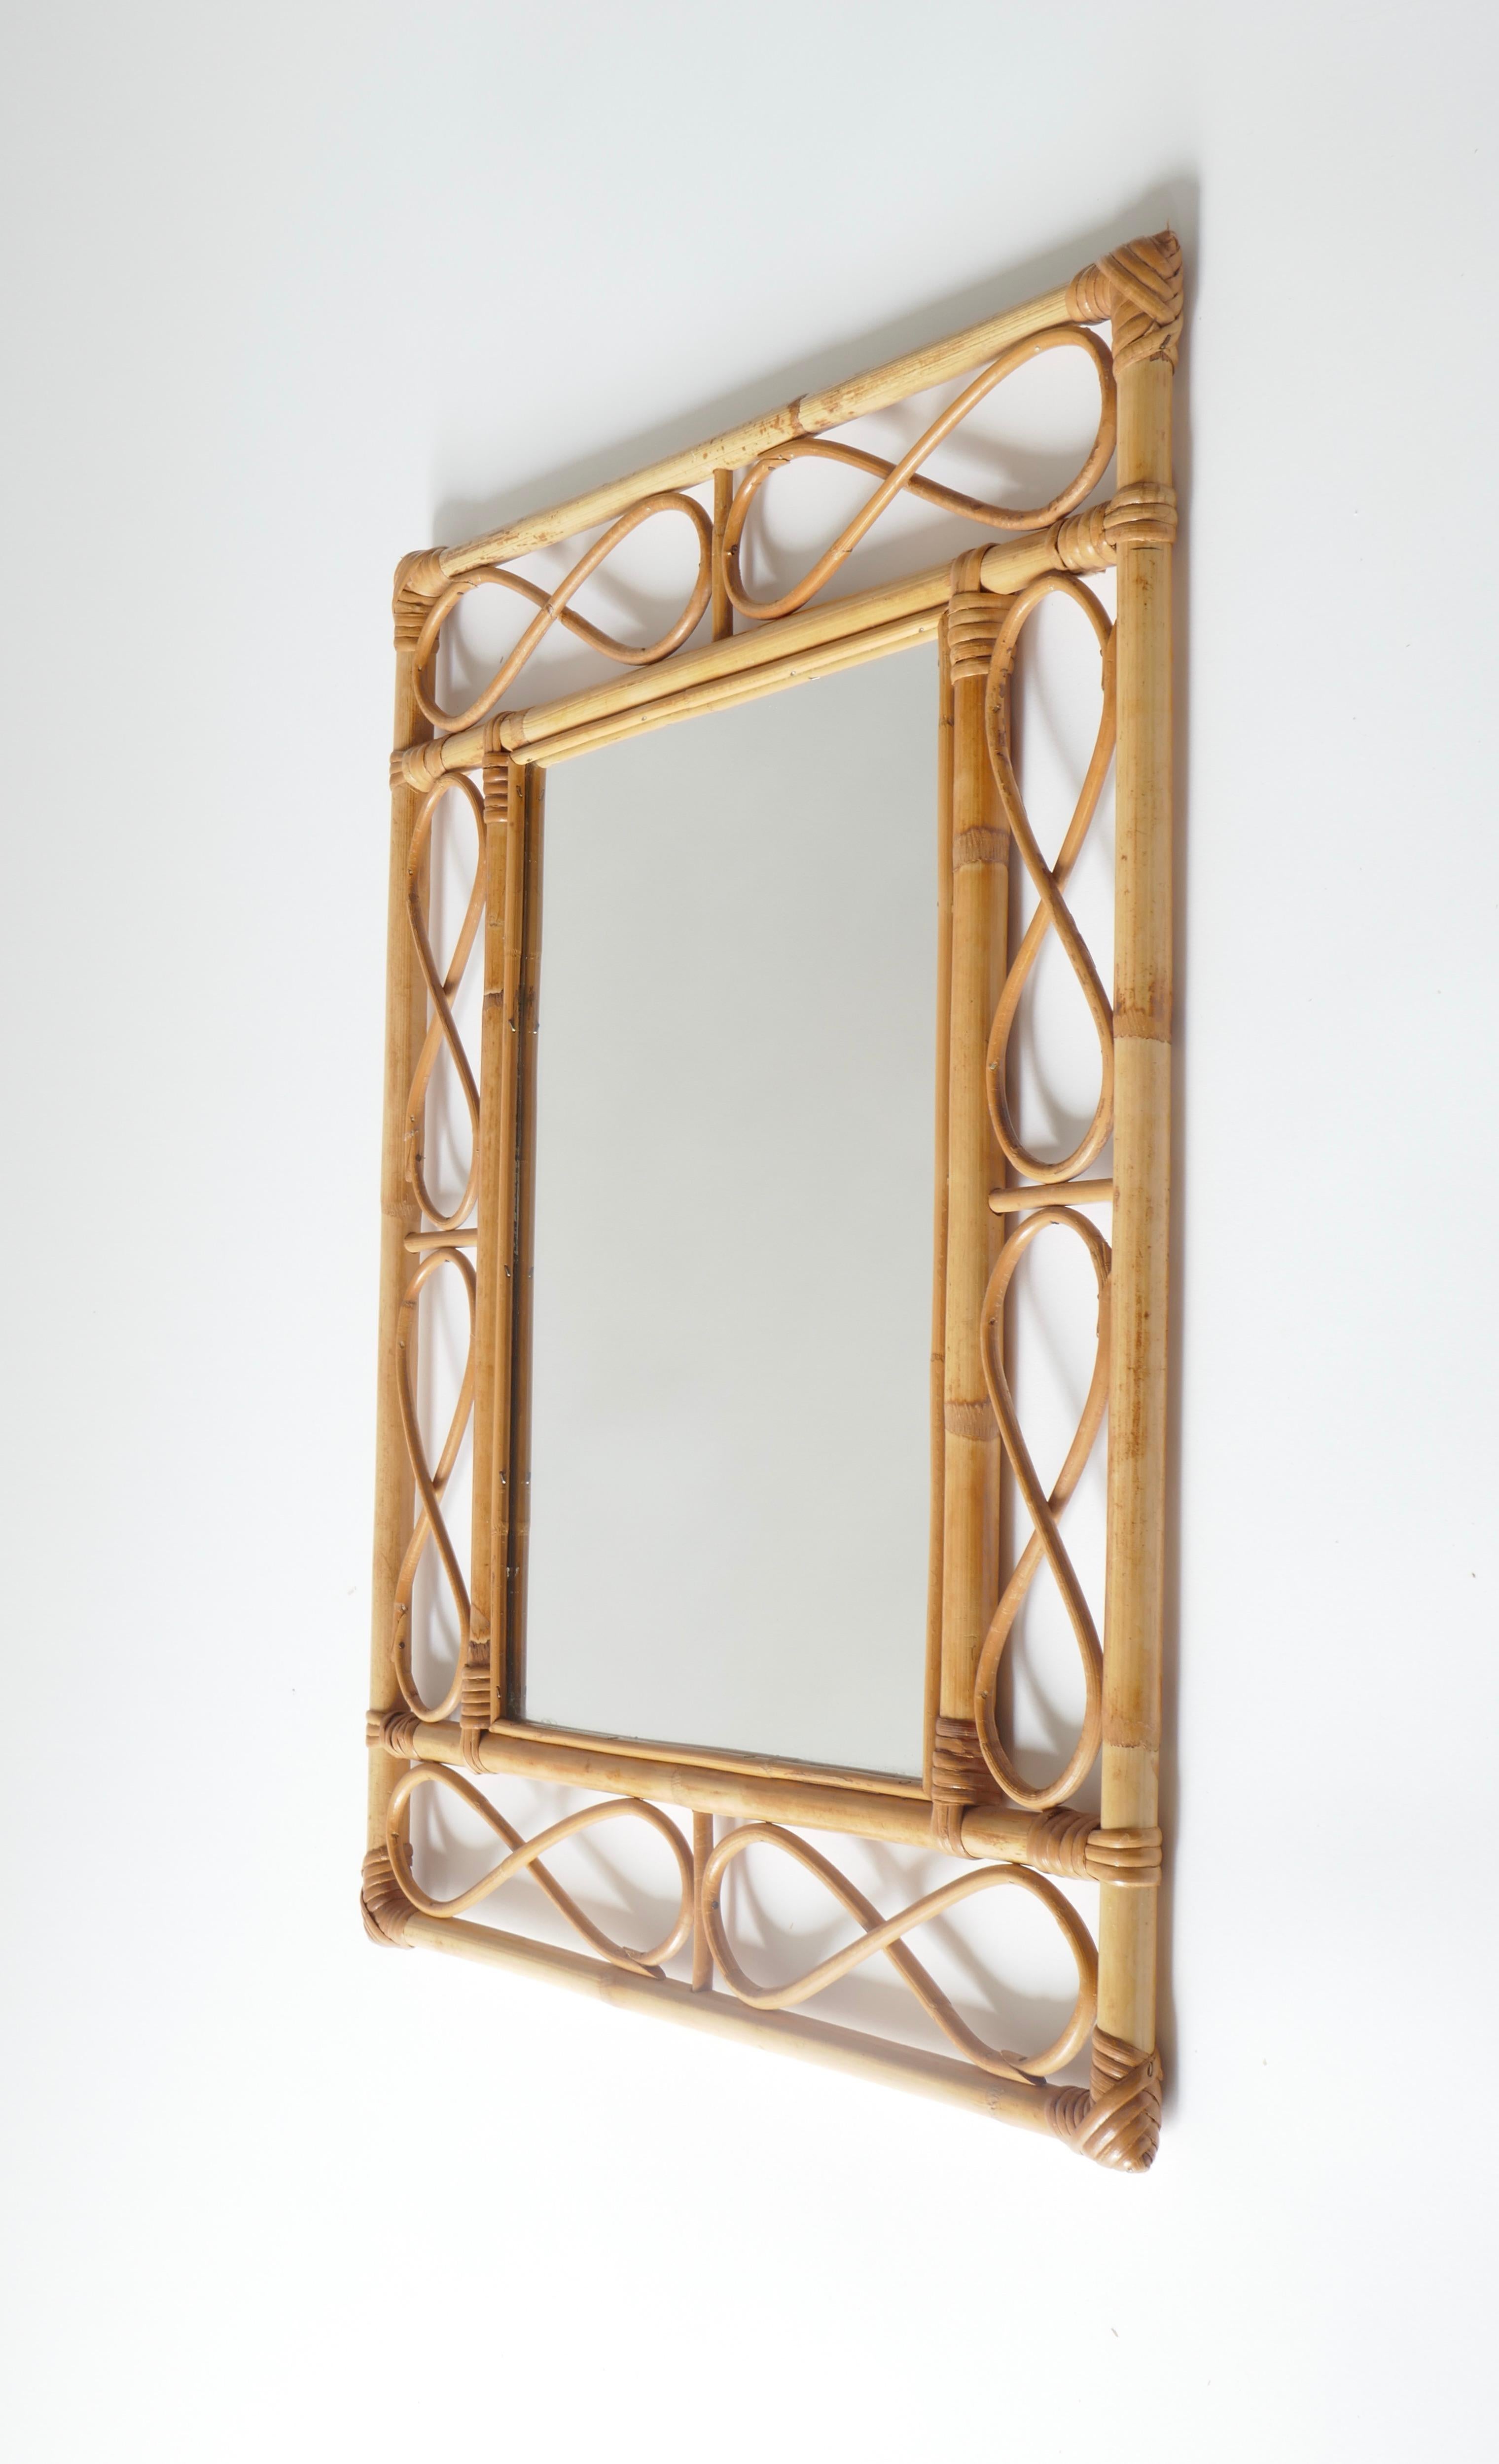 A delicate rattan motif mirror , France 1960s

This item is available in 2 sizes 

Here 
Measures: H 57cm x W 46cm x D 2cm



